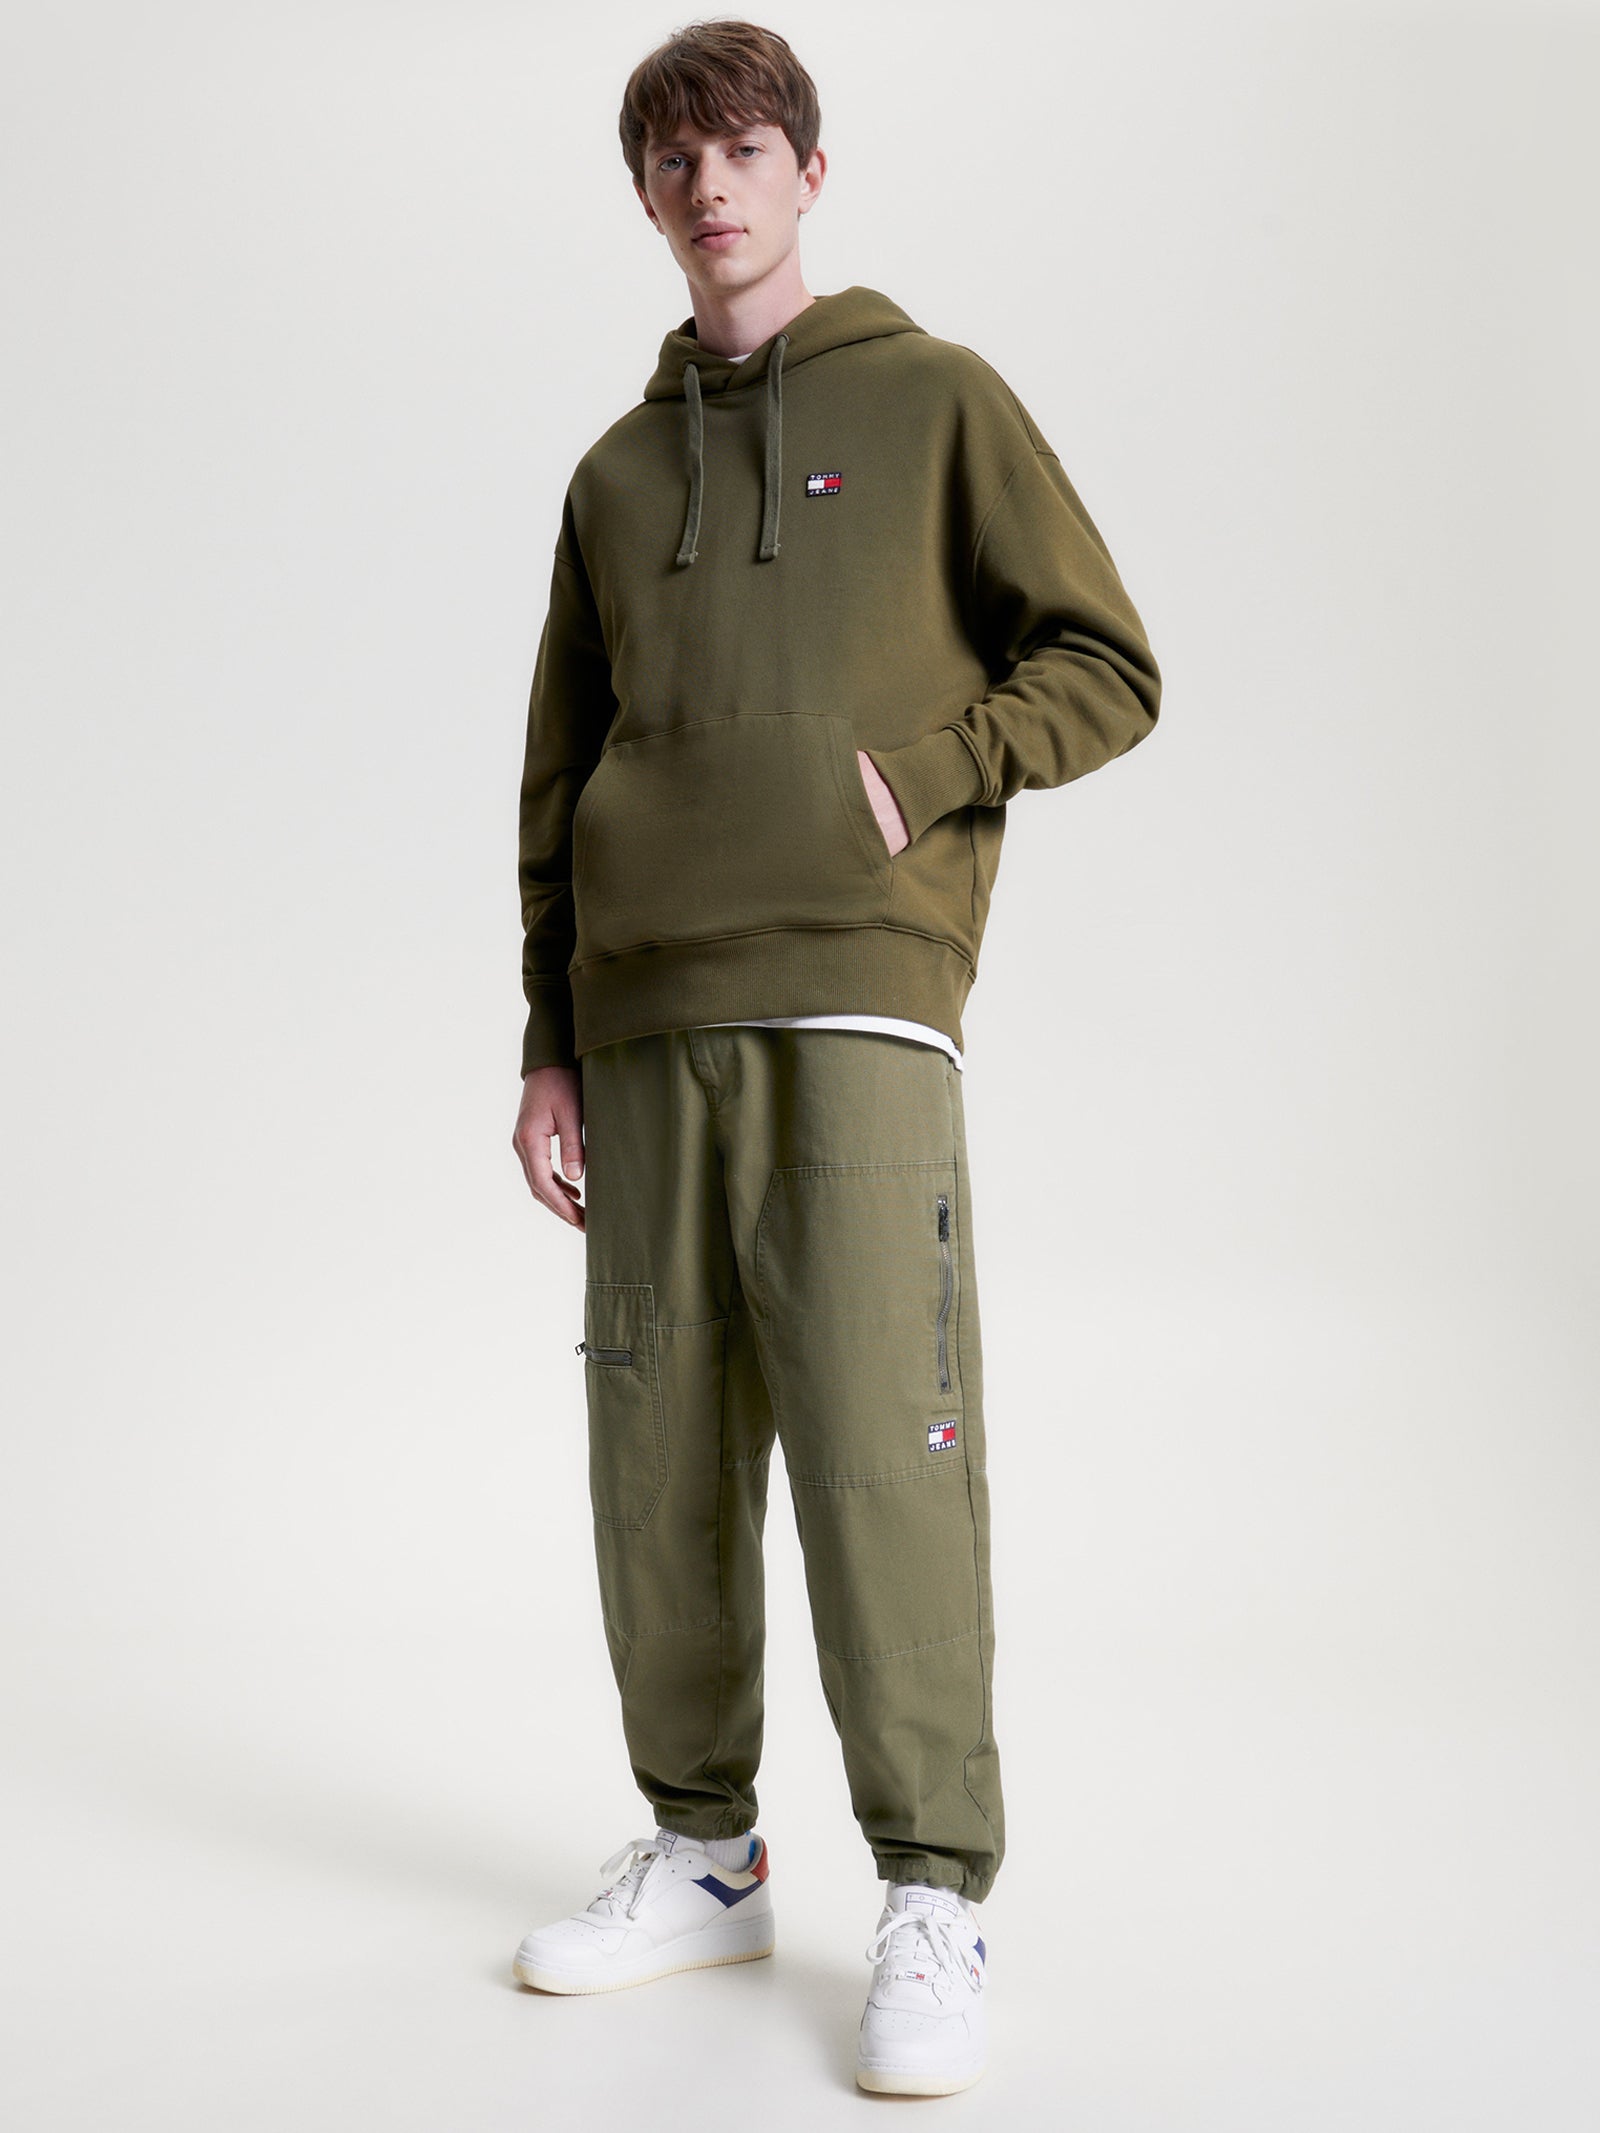 Mens - Organic Cotton Baggy Cargo Pants in Drab Olive Green